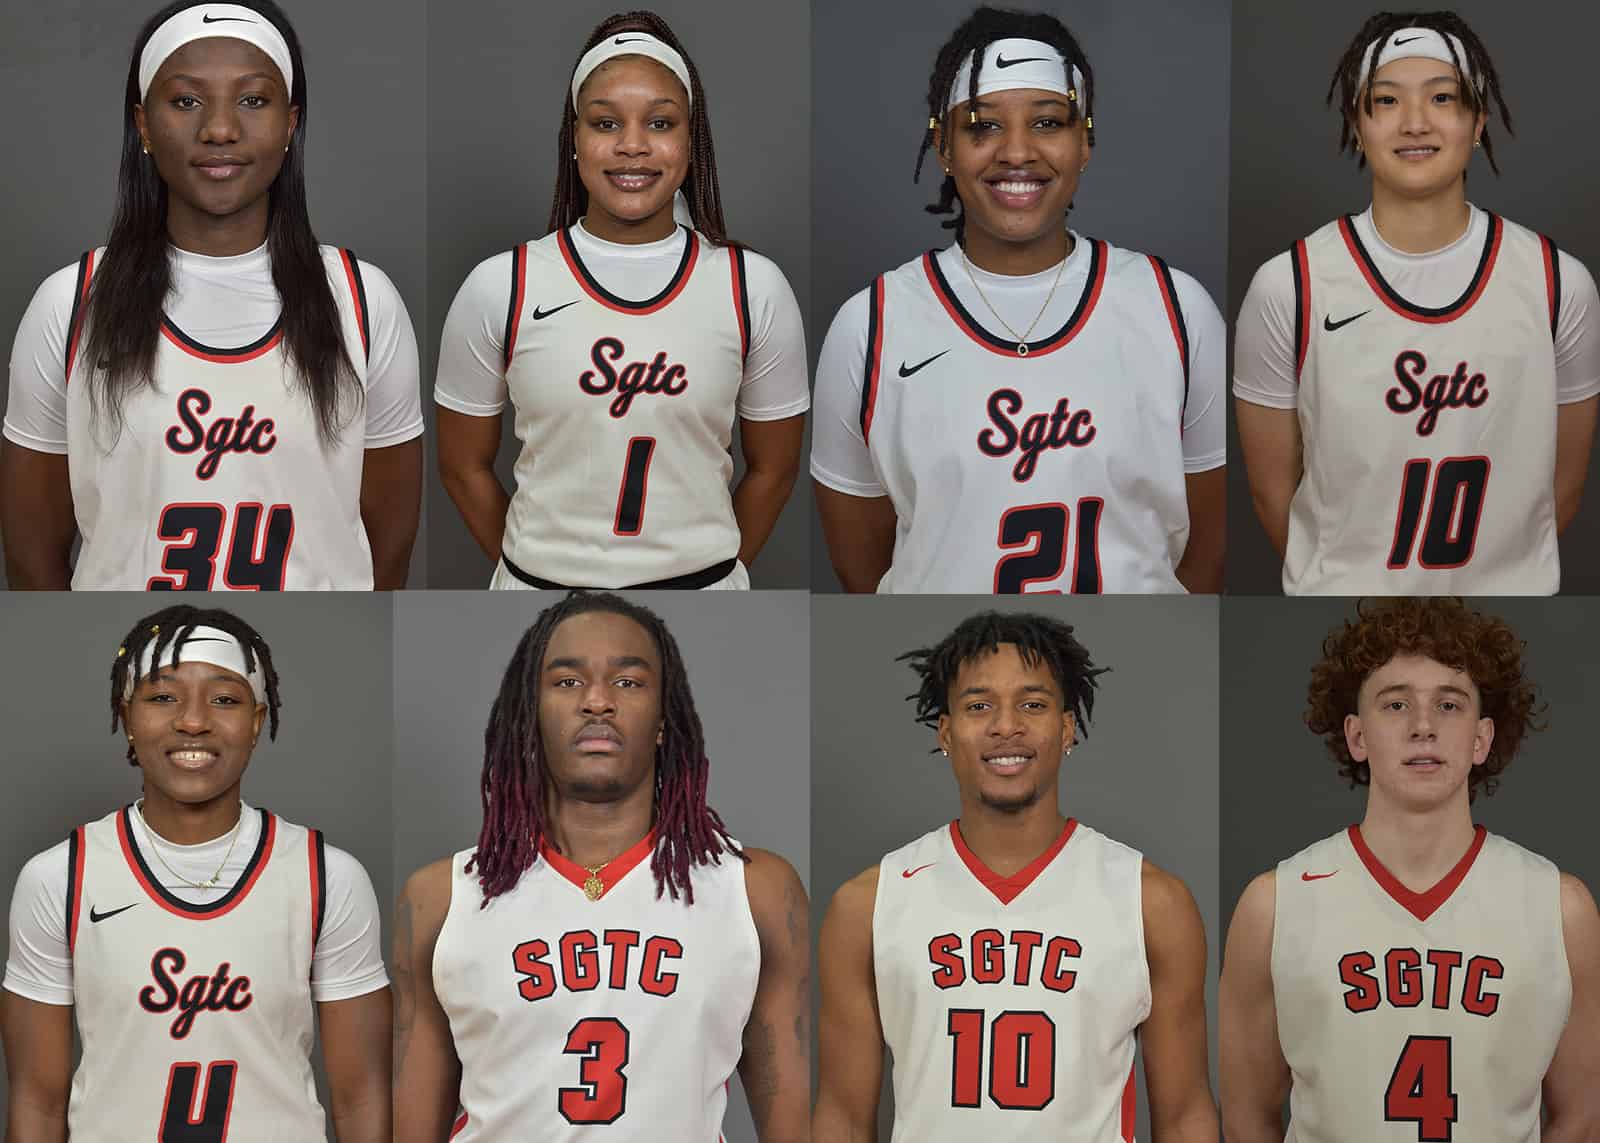 Eight South Georgia Technical College basketball players are currently ranked nationally for their individual efforts. They include Lady Jets: Femme Sikuzani (34), Imani McNeal (1), Hope Butera (21), Moe Shida (10), and Veronica Charles (4). The Jets earning national recognition include: the nation’s top rebounderJalen Reynolds (3), Marvin McGhee (10), and Will Johnston (4).